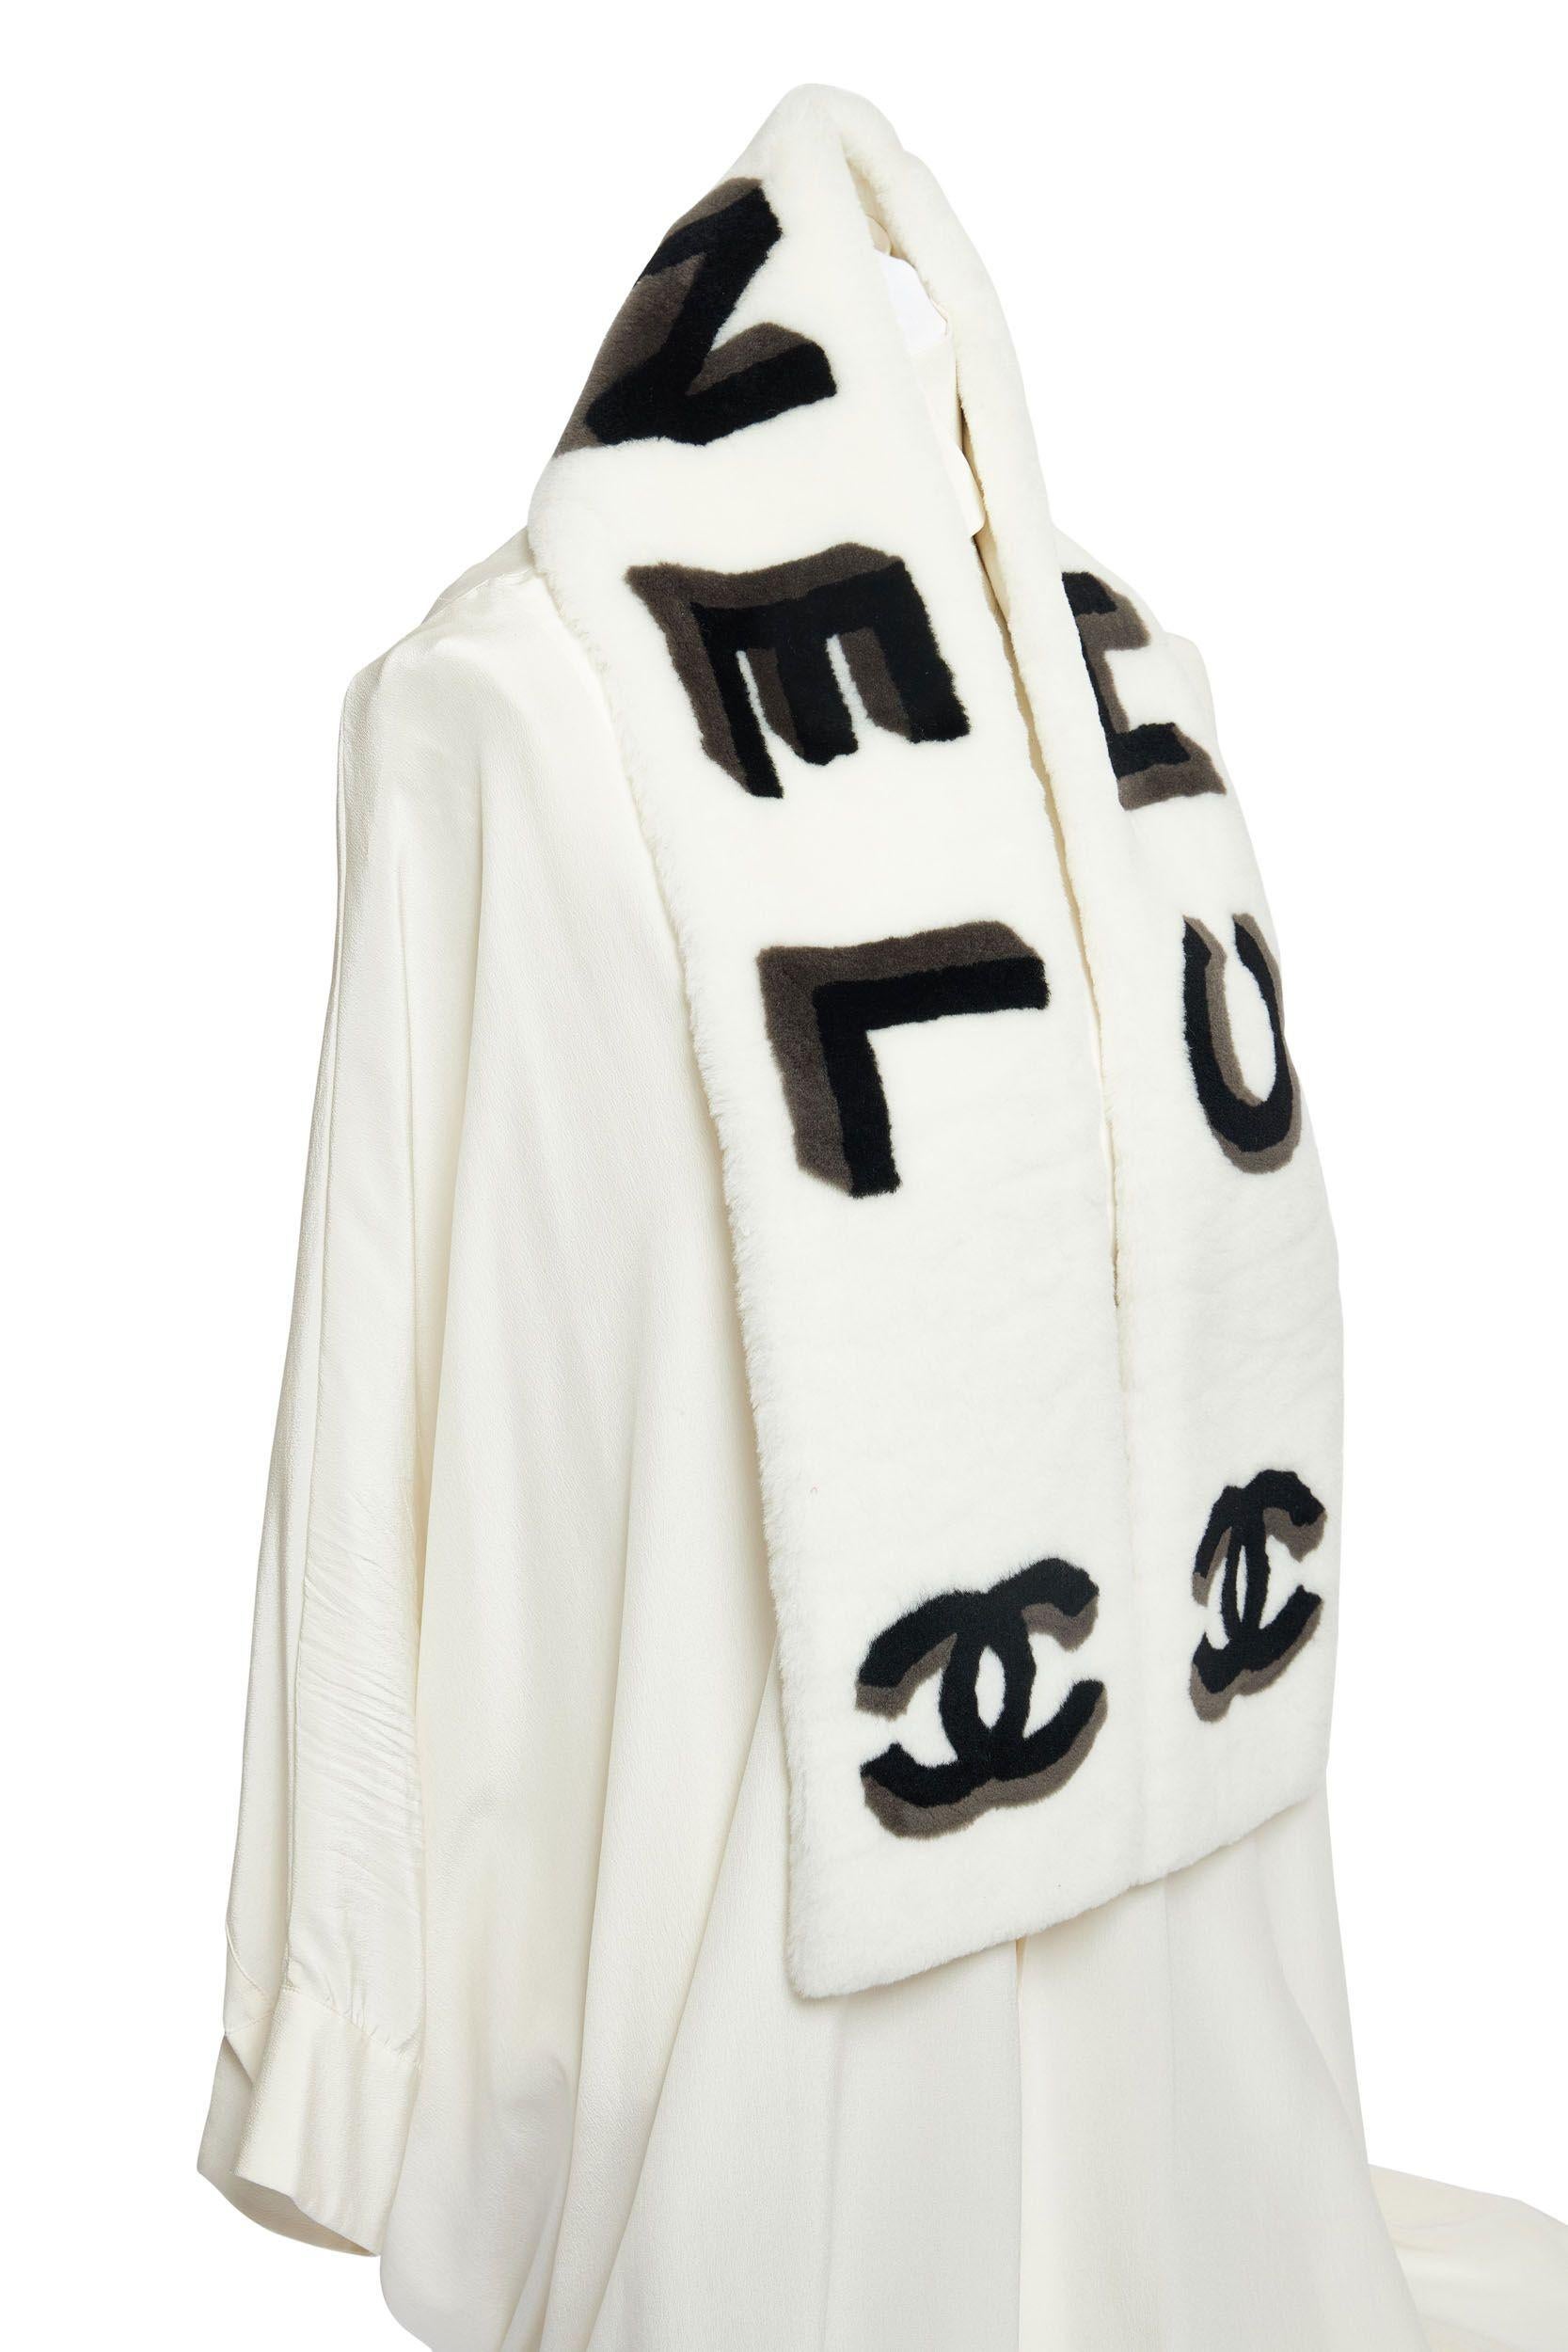 New Chanel white sheepskin scarf with black and grey three-dimensional Chanel letters and CC logo. Warm white cashmere lining.